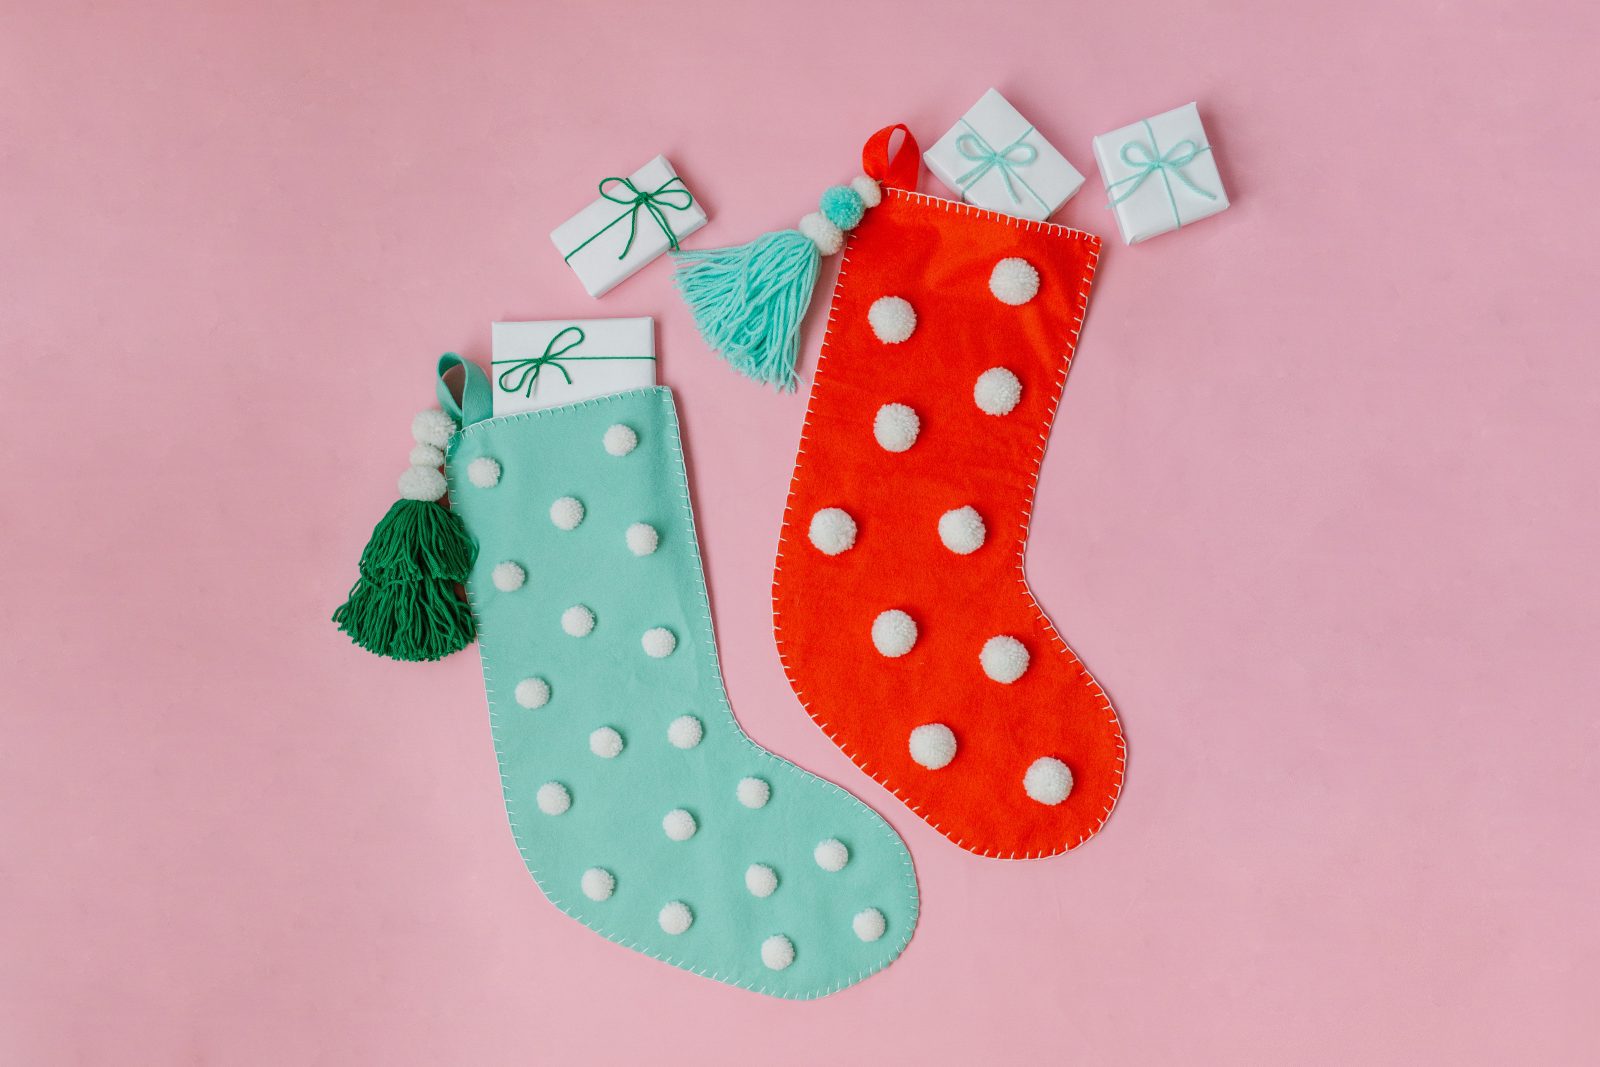 Christmas Crafts: Stitched Felt and Pom Pom Stockings + a tutorial featured by Top US Craft Blog + The Pretty Life Girls